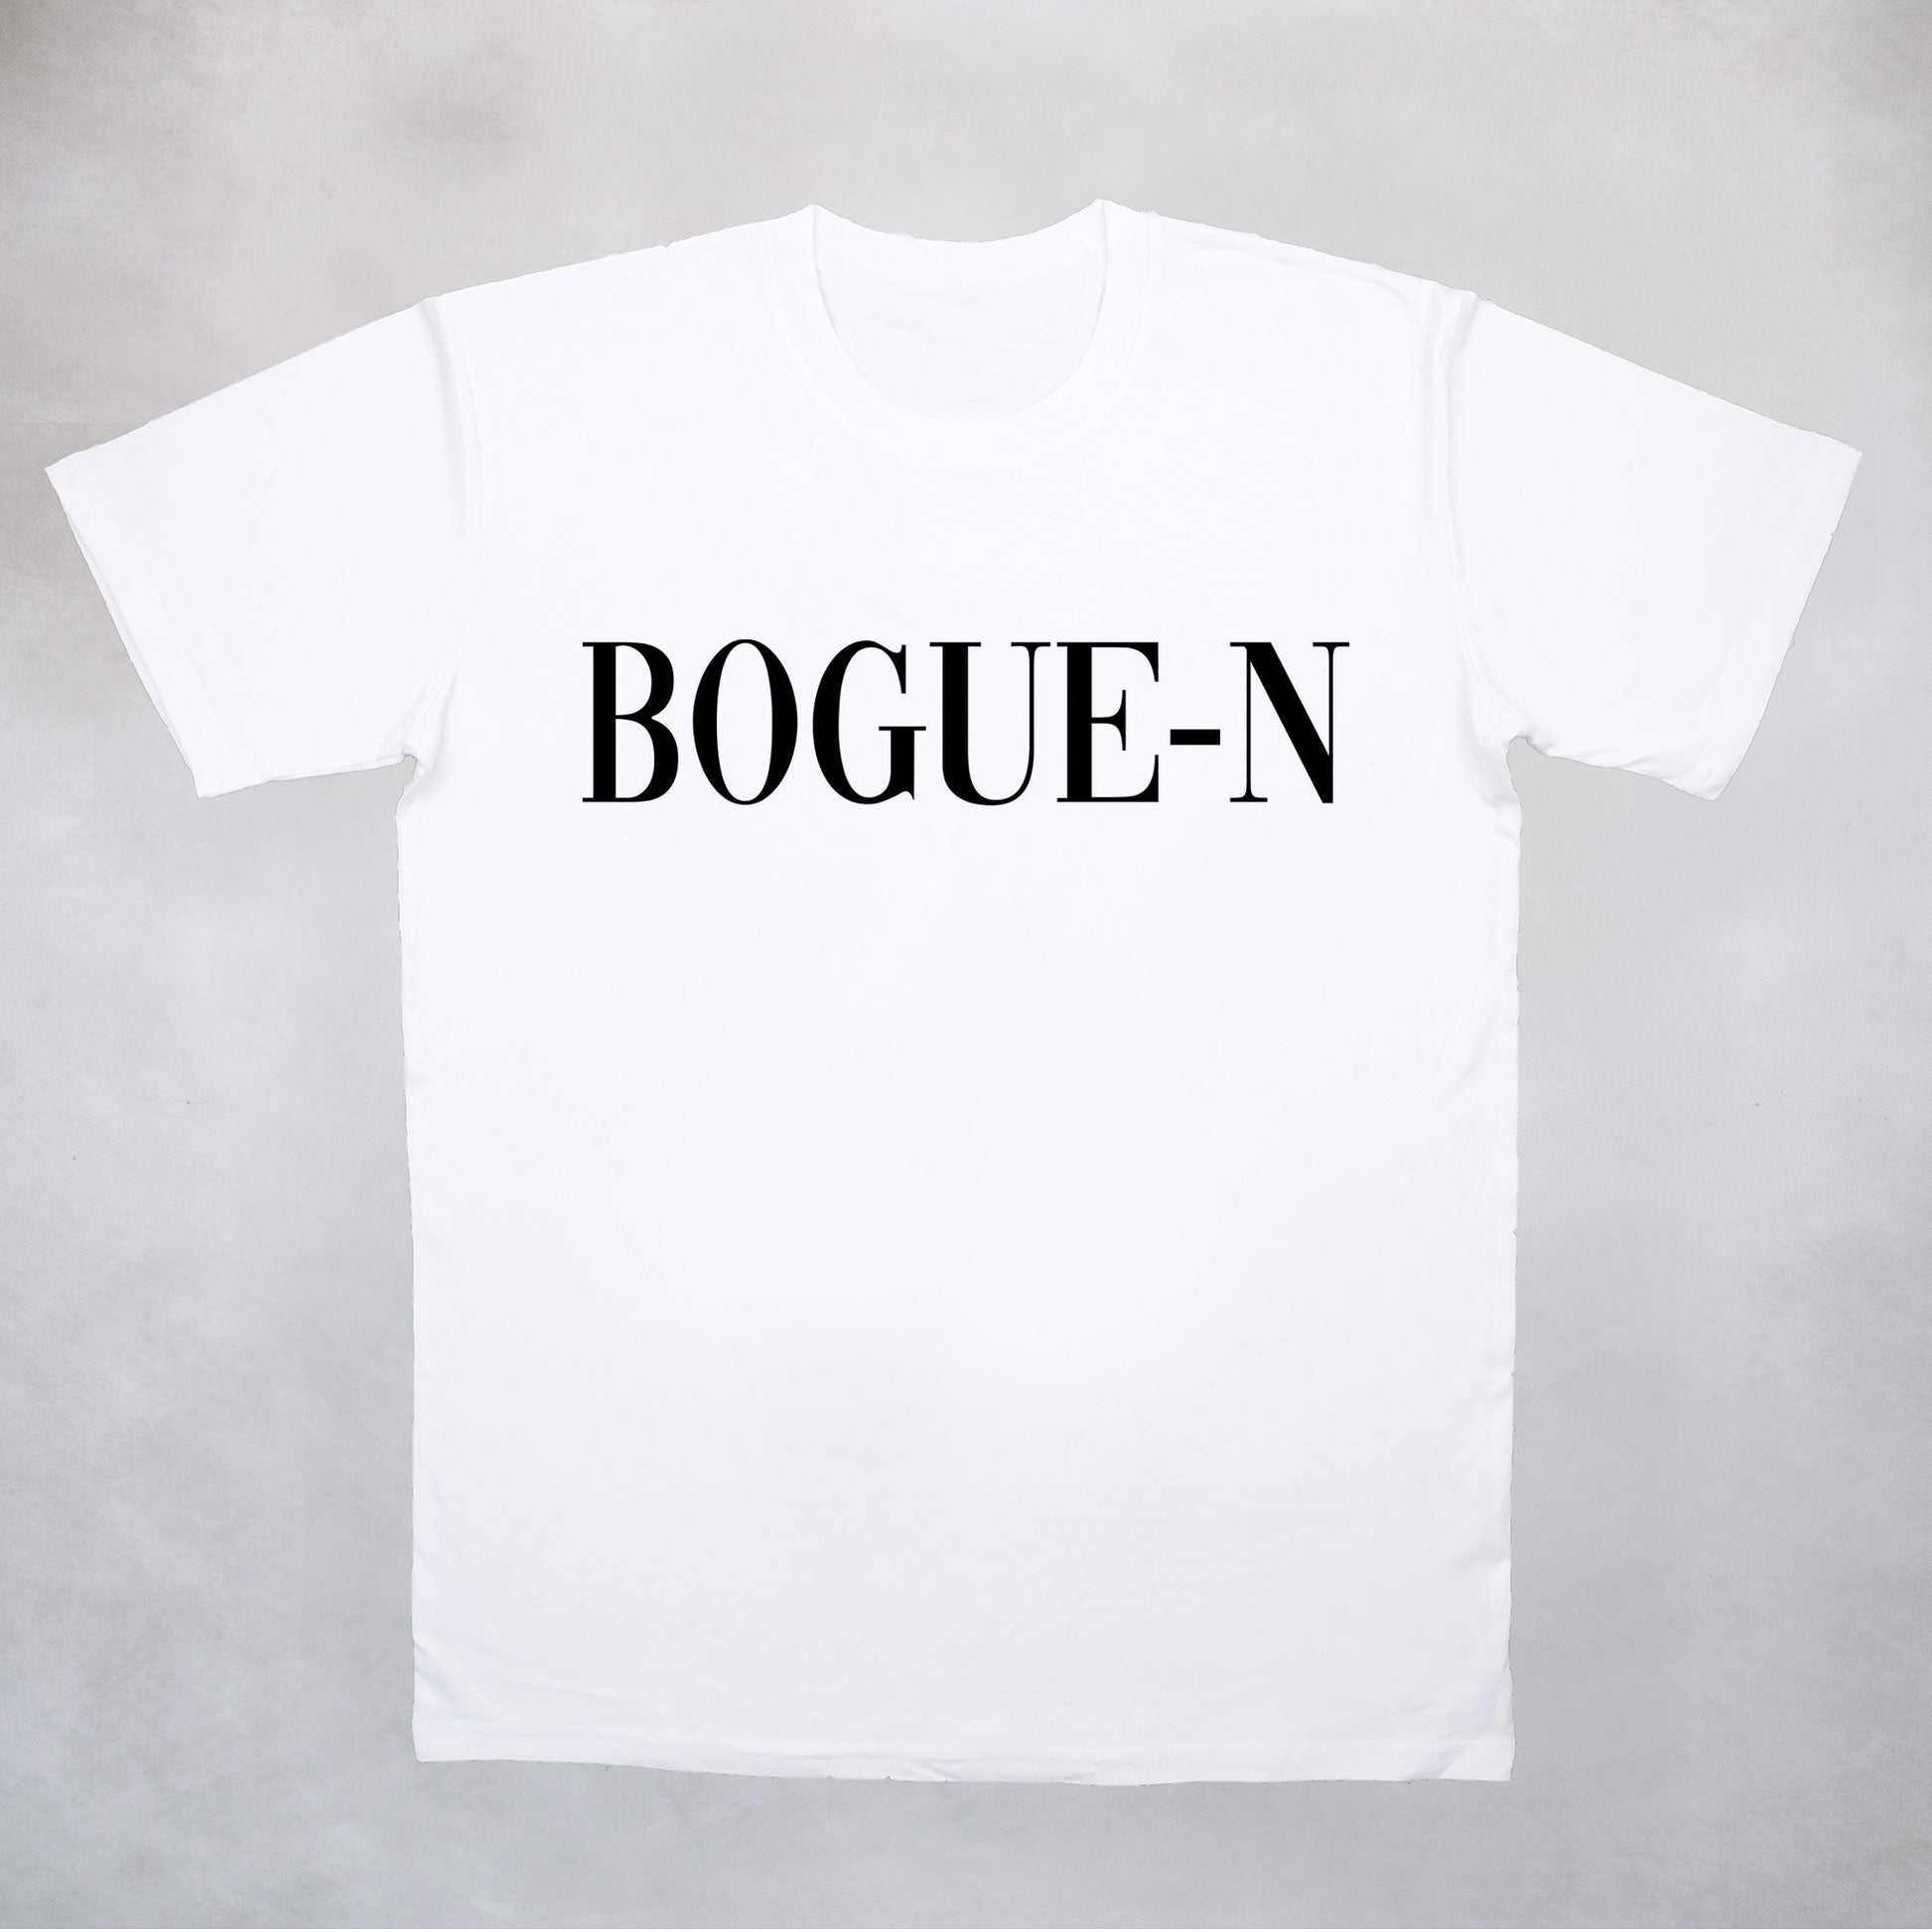 Classy Duds Short Sleeve T-Shirts S / White / Standard Bogue-n Tee